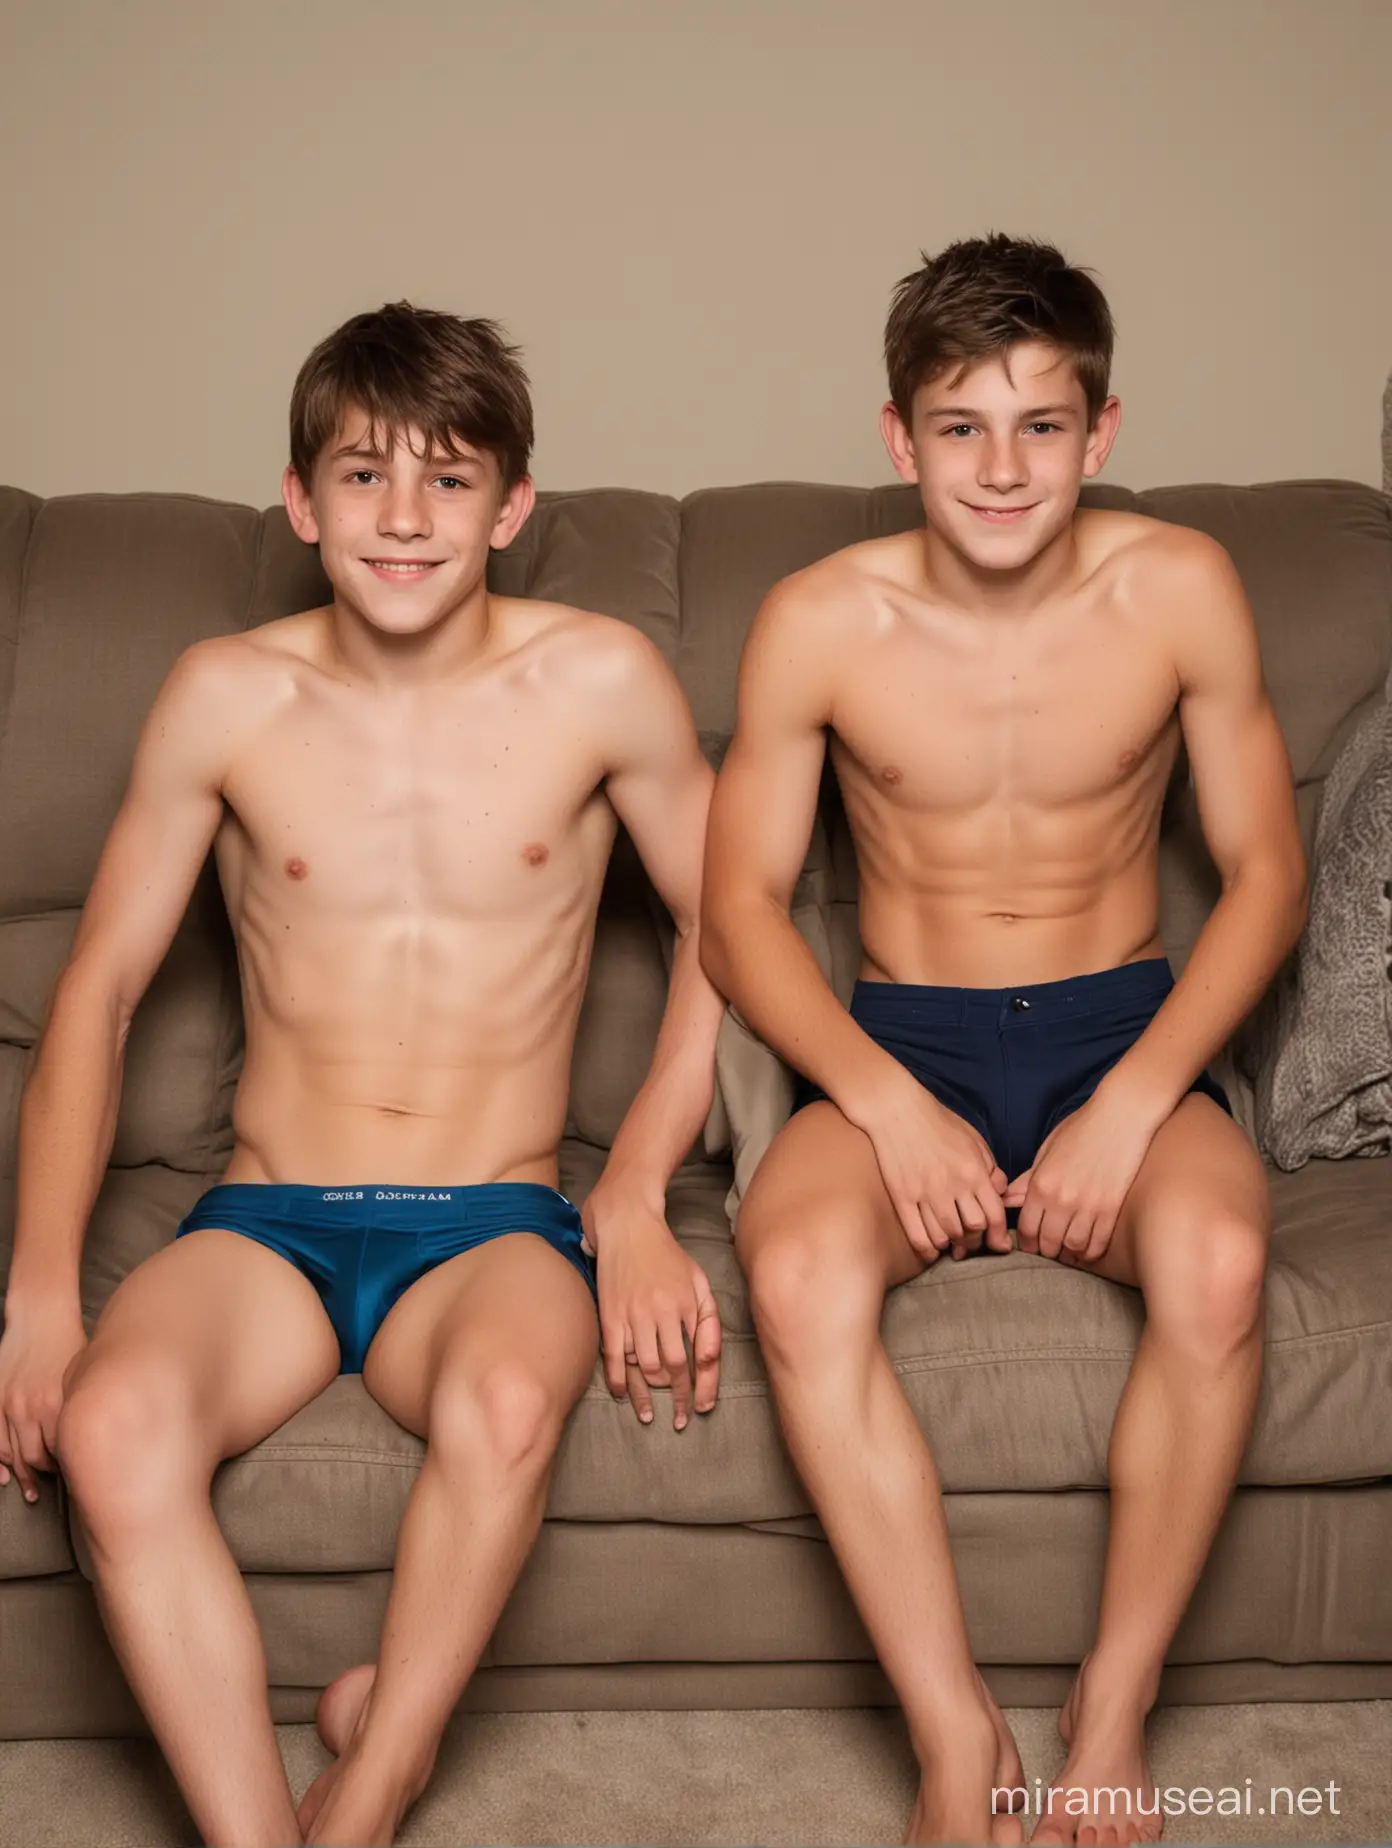 15 year old muscular shirtless boys sitting on a couch